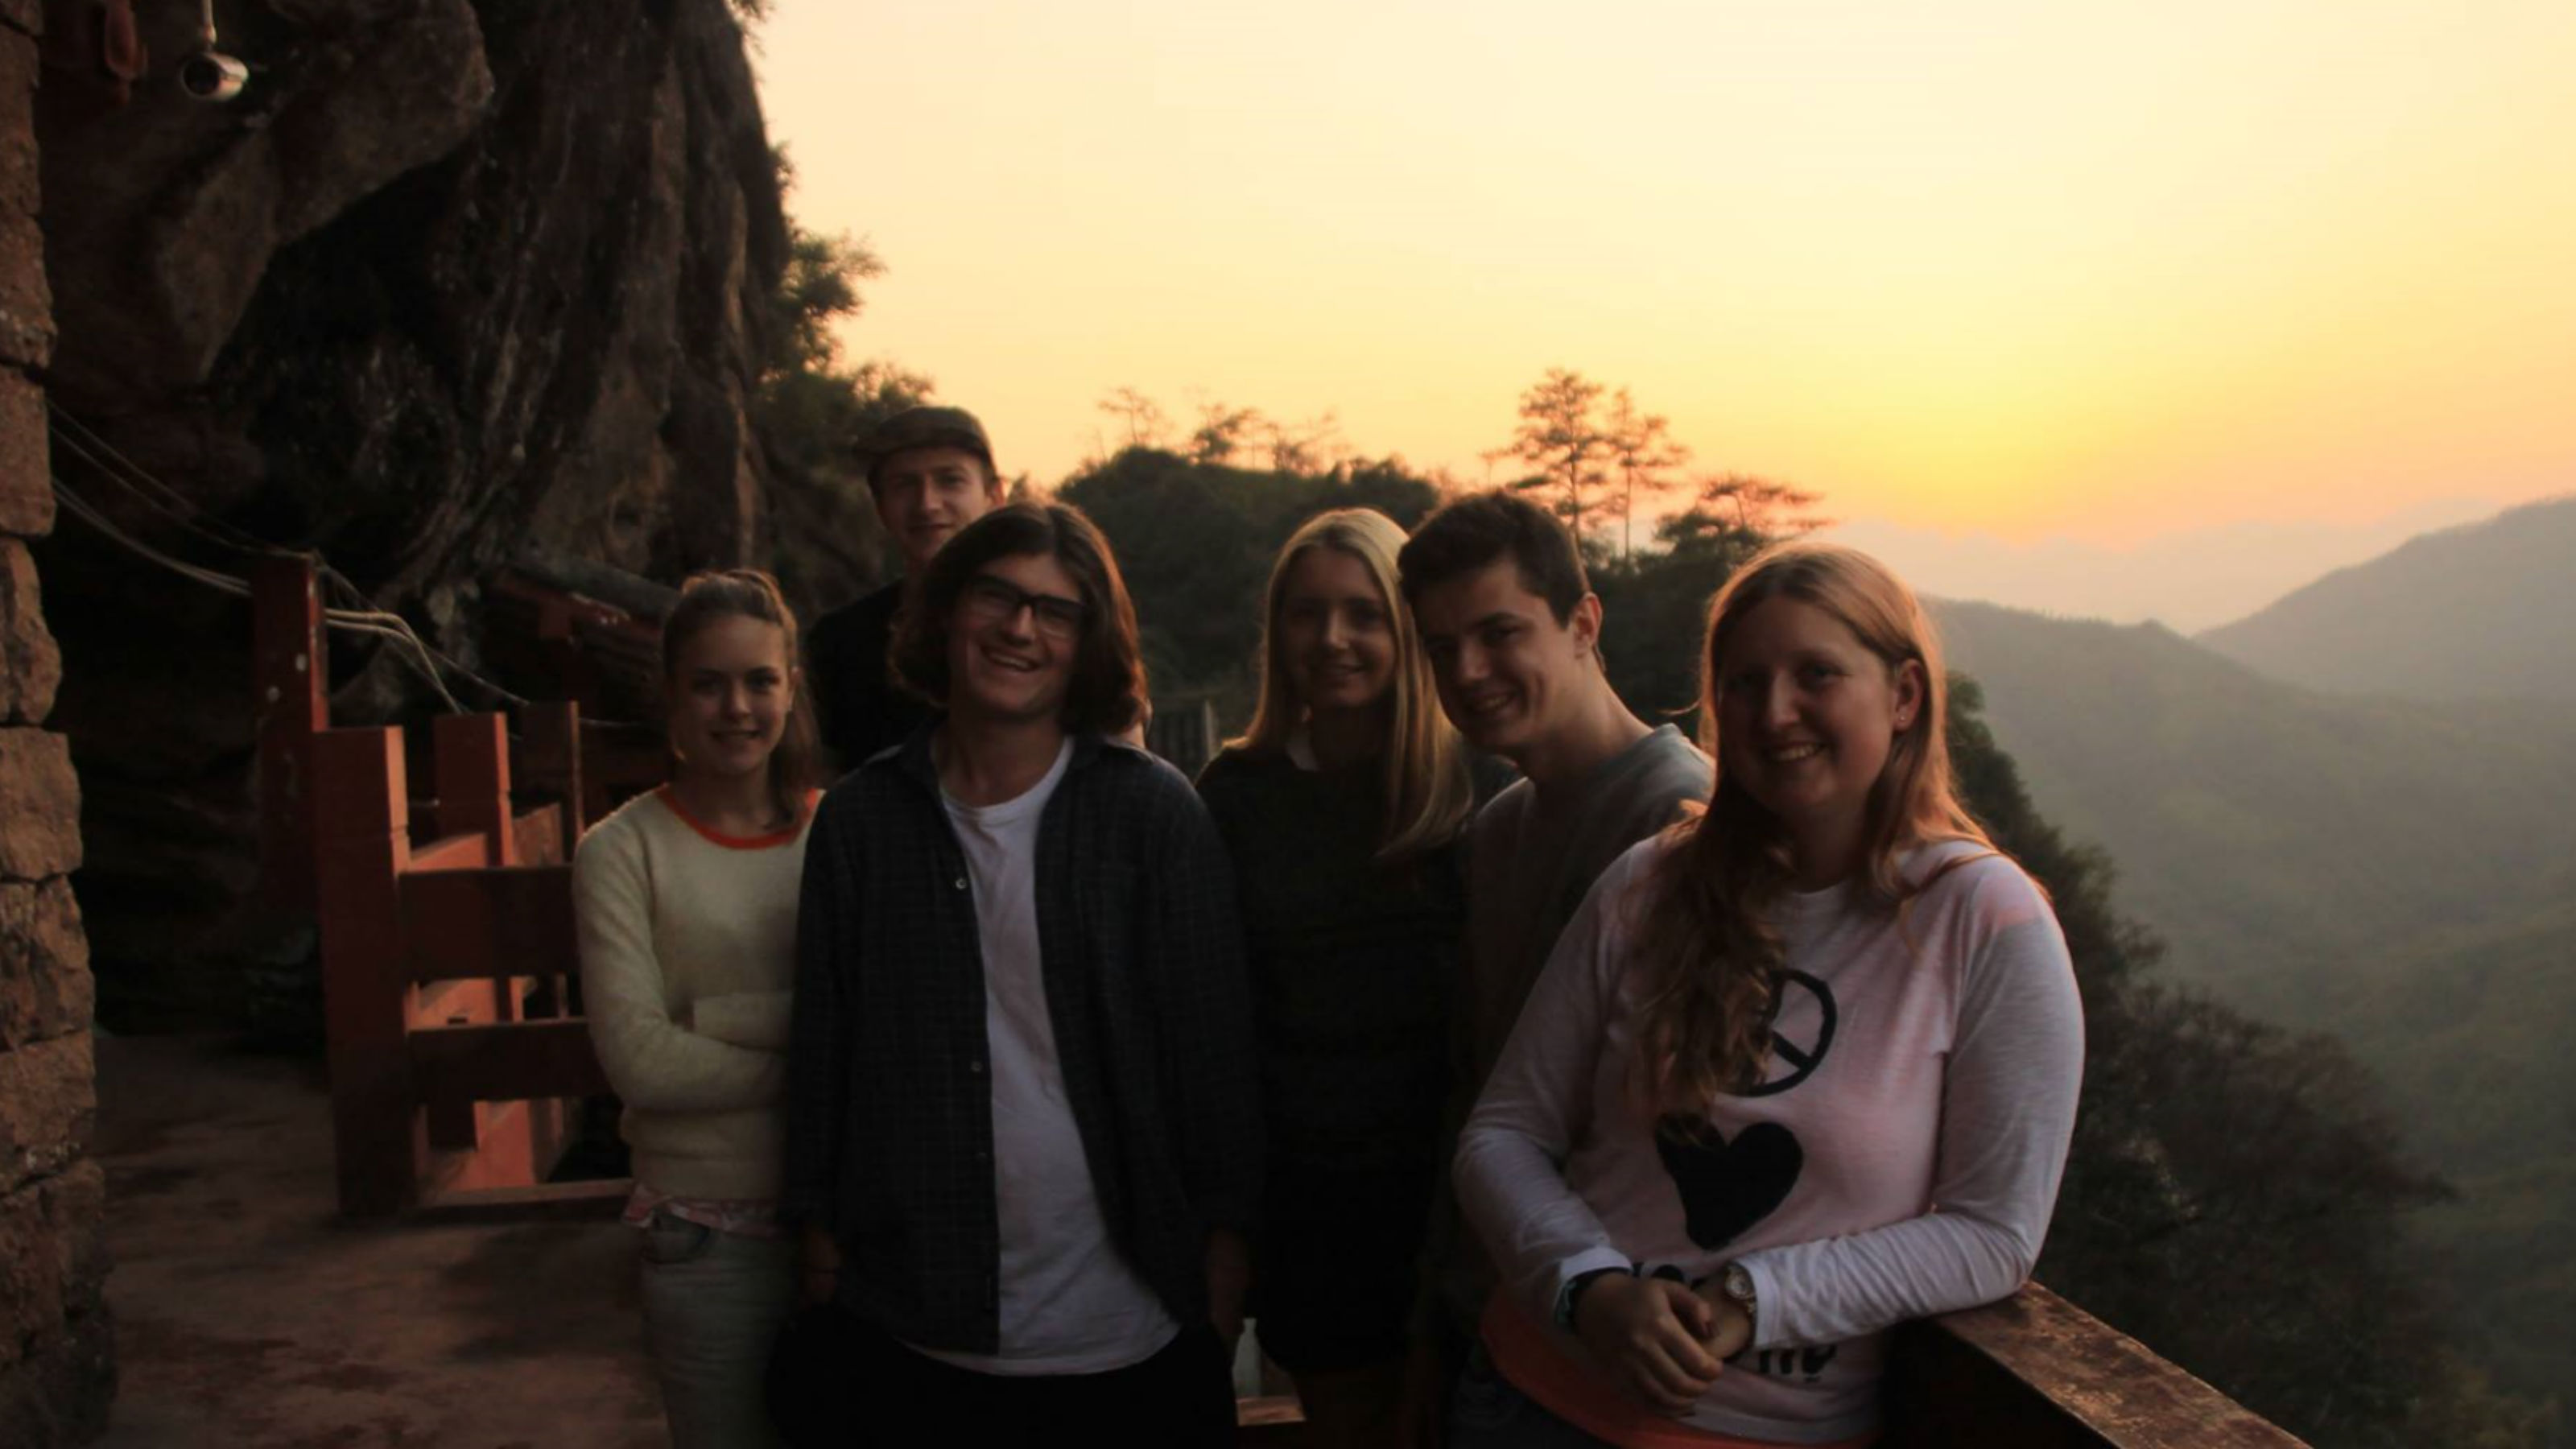 Victoria student, Brady, with a group of international students in China, standing in front of a setting sunscape.